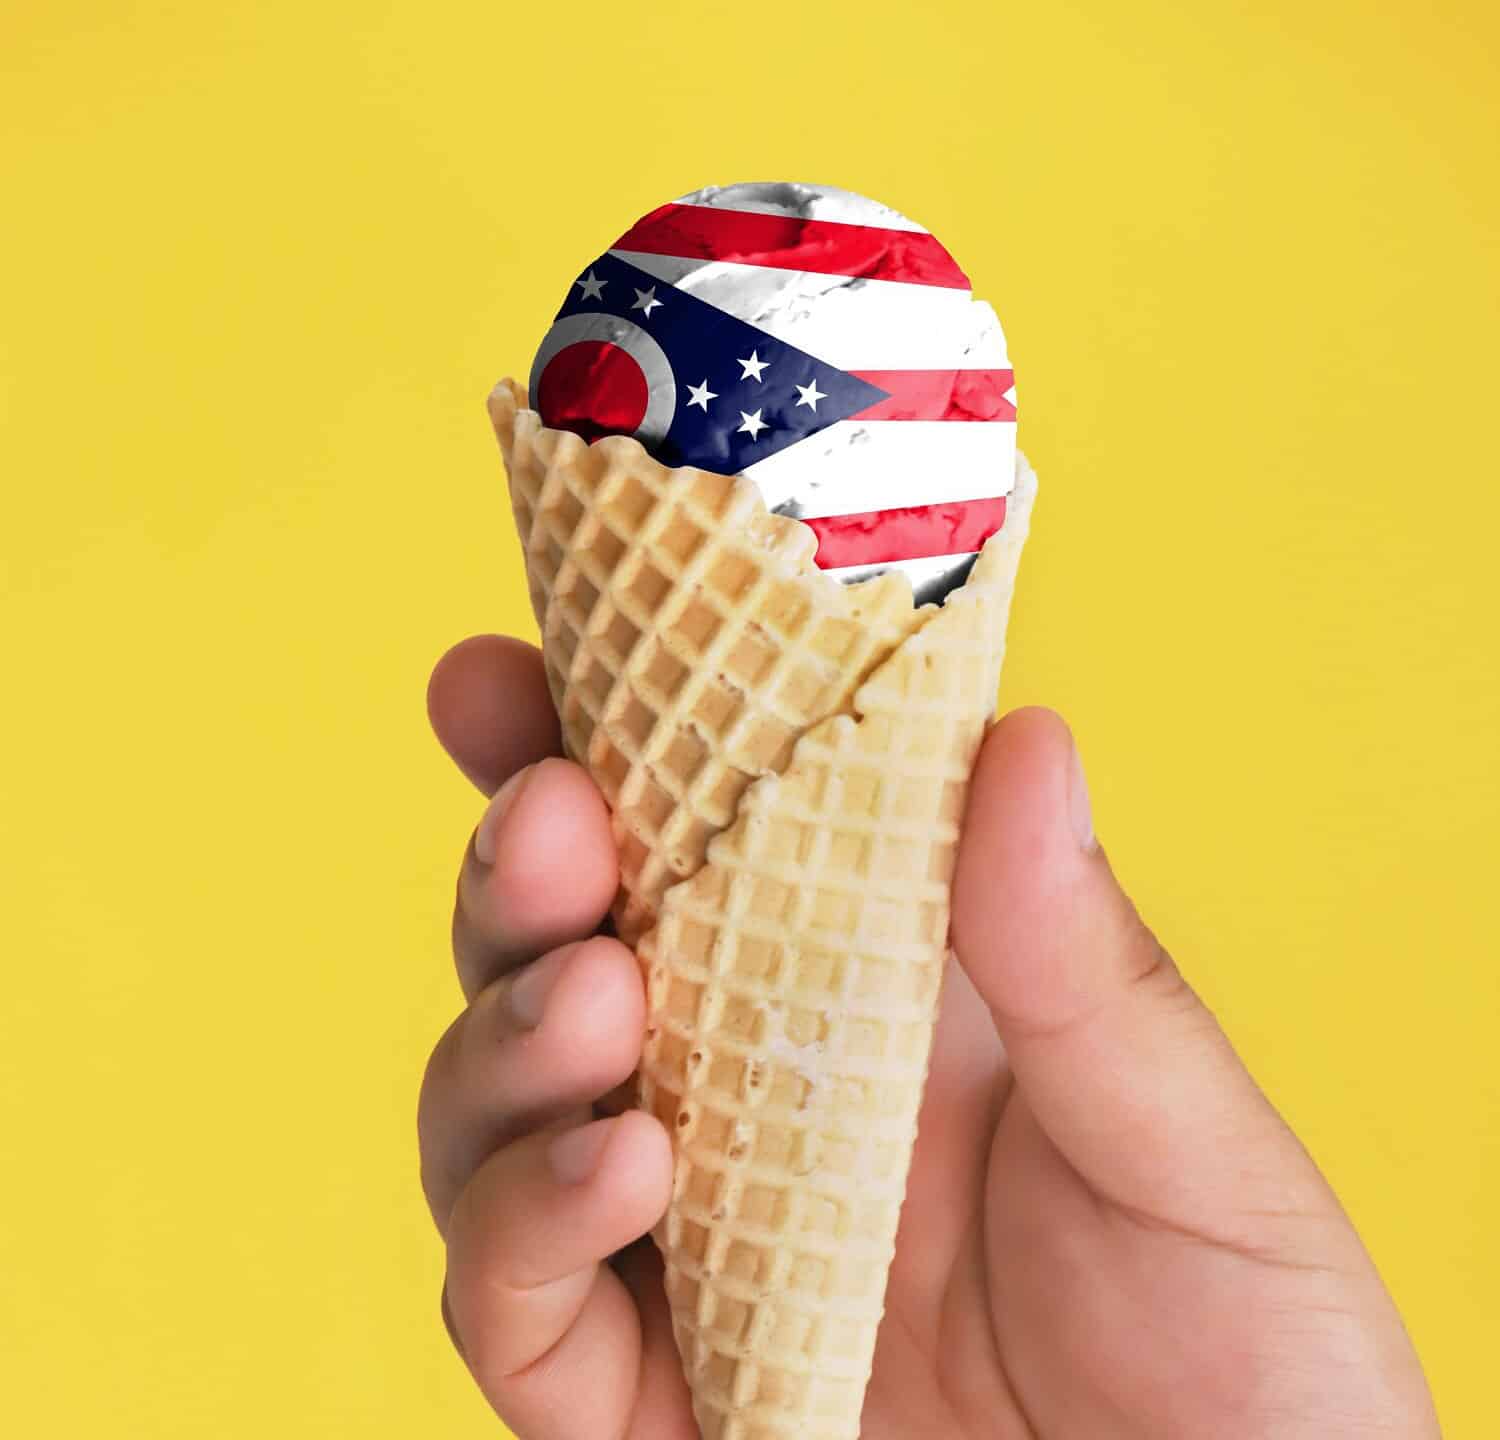 On a colorful background, a hand with ice cream in the form of the flag of State of Ohio